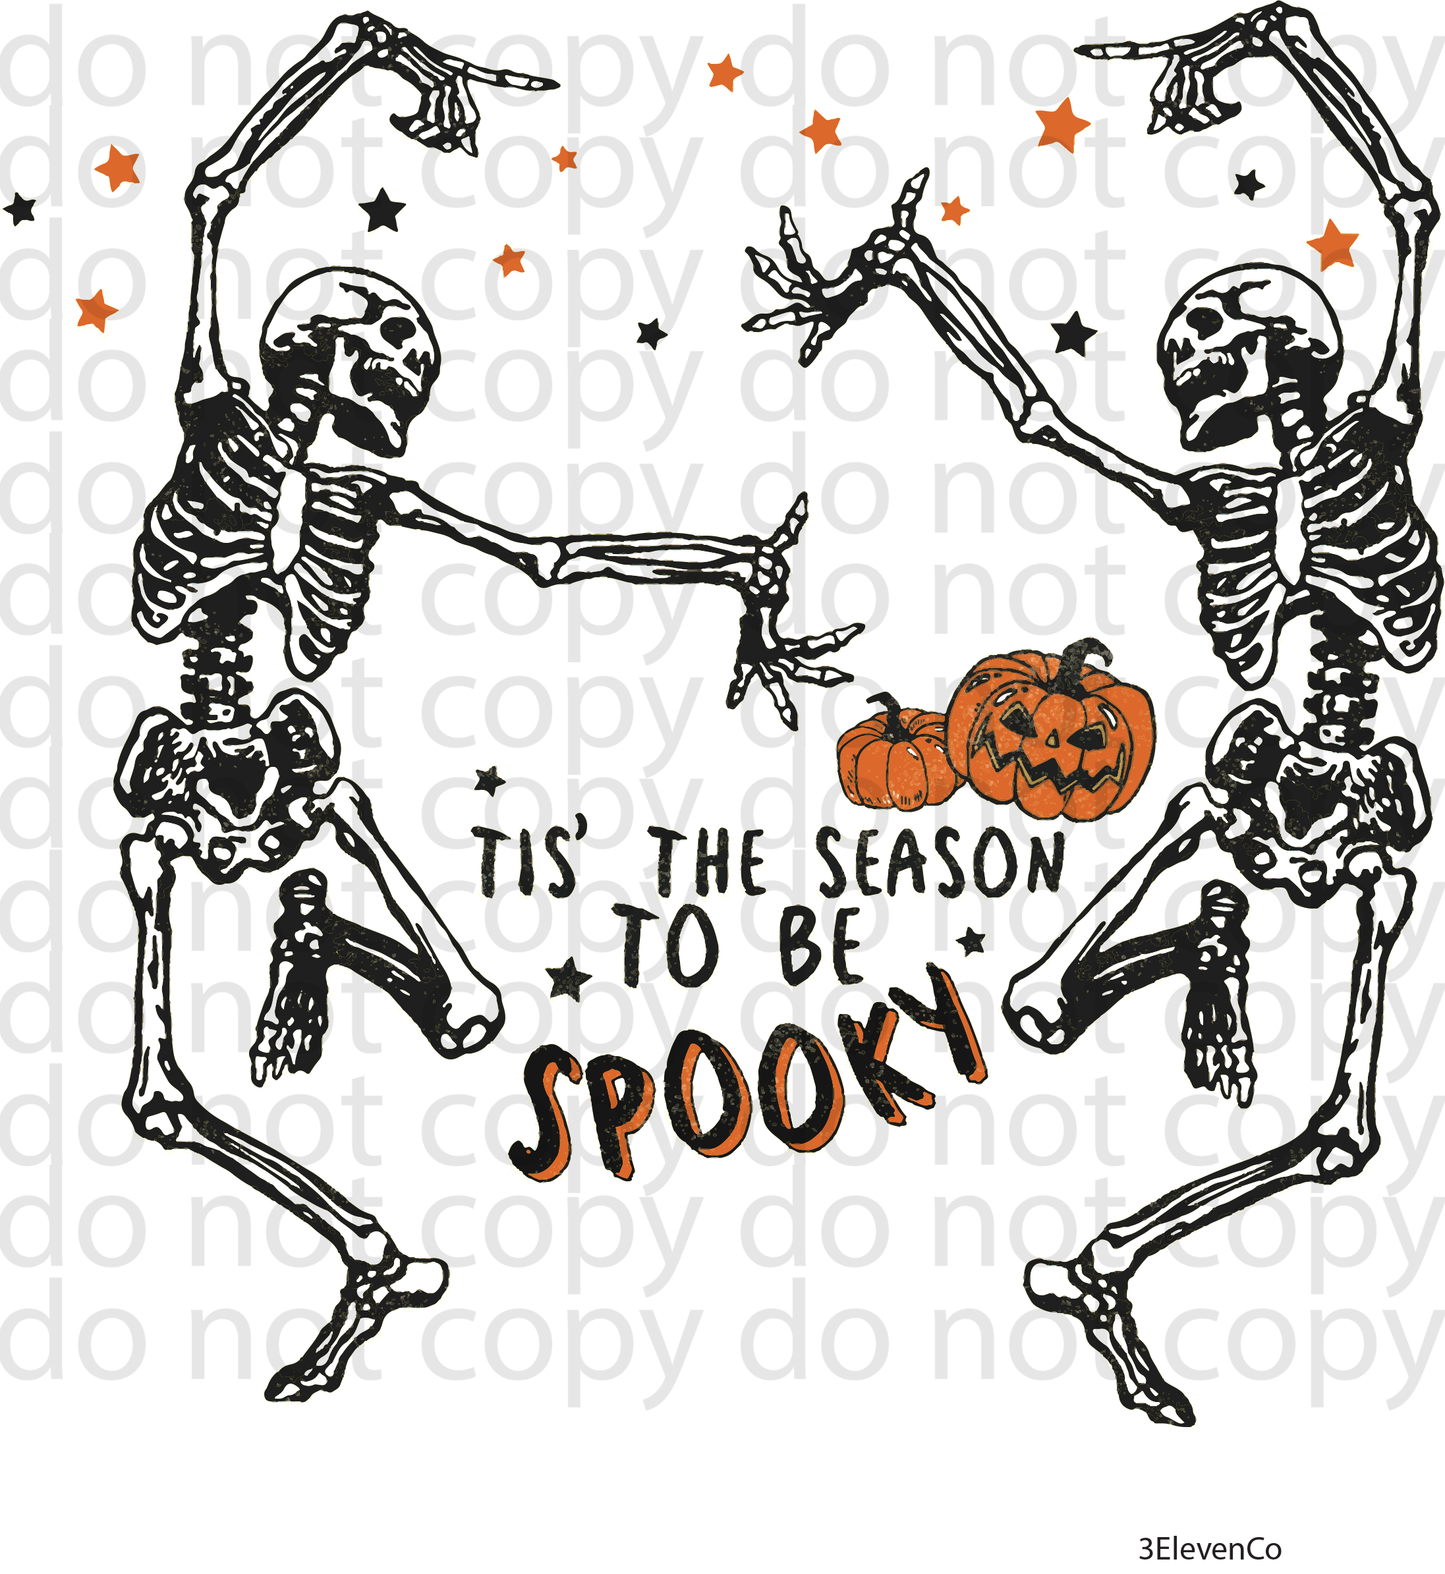 Tis the season to be spooky decal or sublimation print